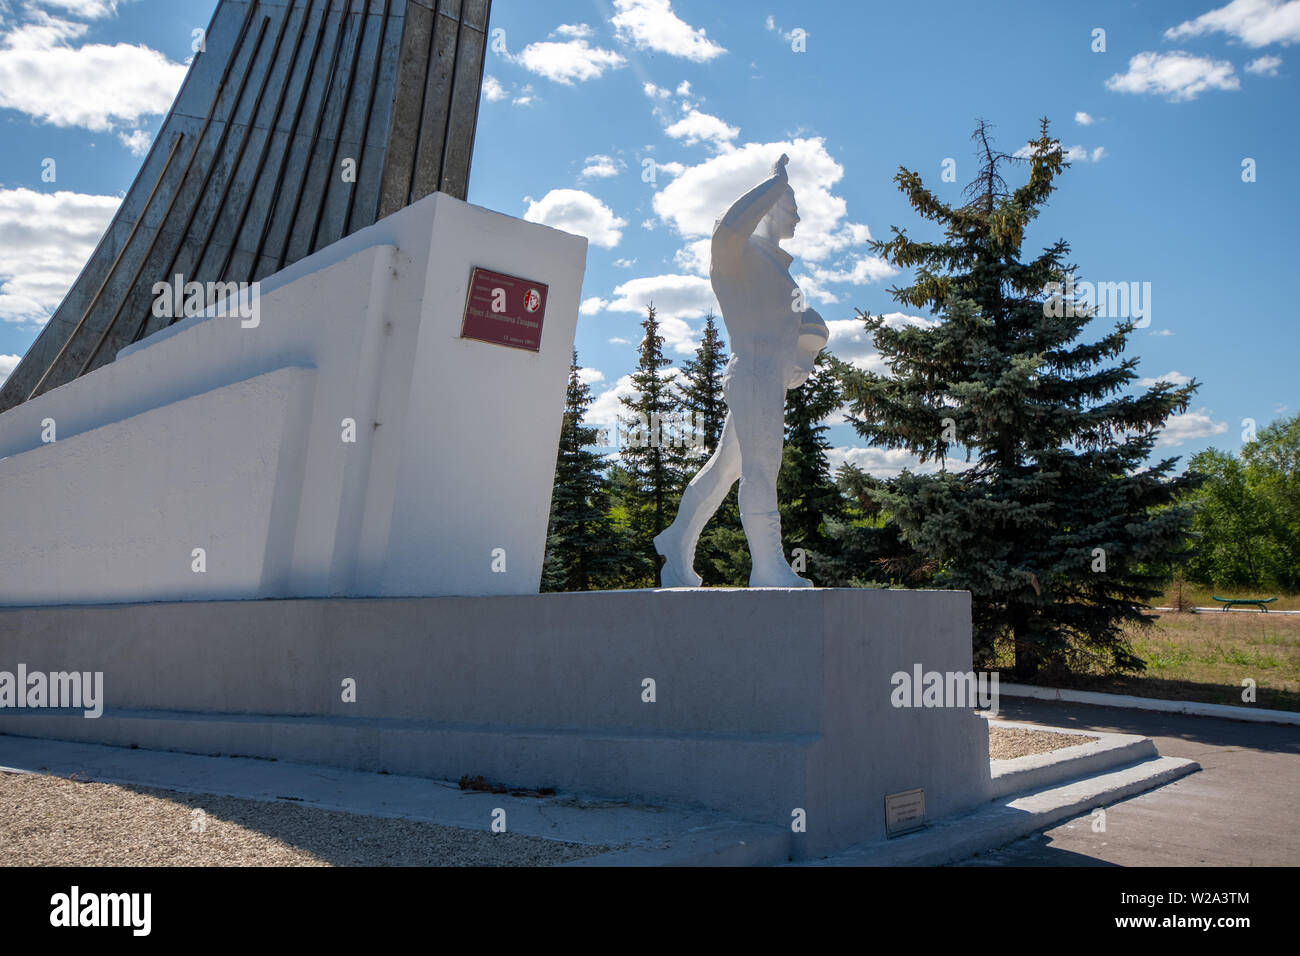 SMELOVKA, SARATOV, RUSSIA - JULY 2019: Place of landing of the first cosmonaut Yuri Gagarin. Monument. Stock Photo